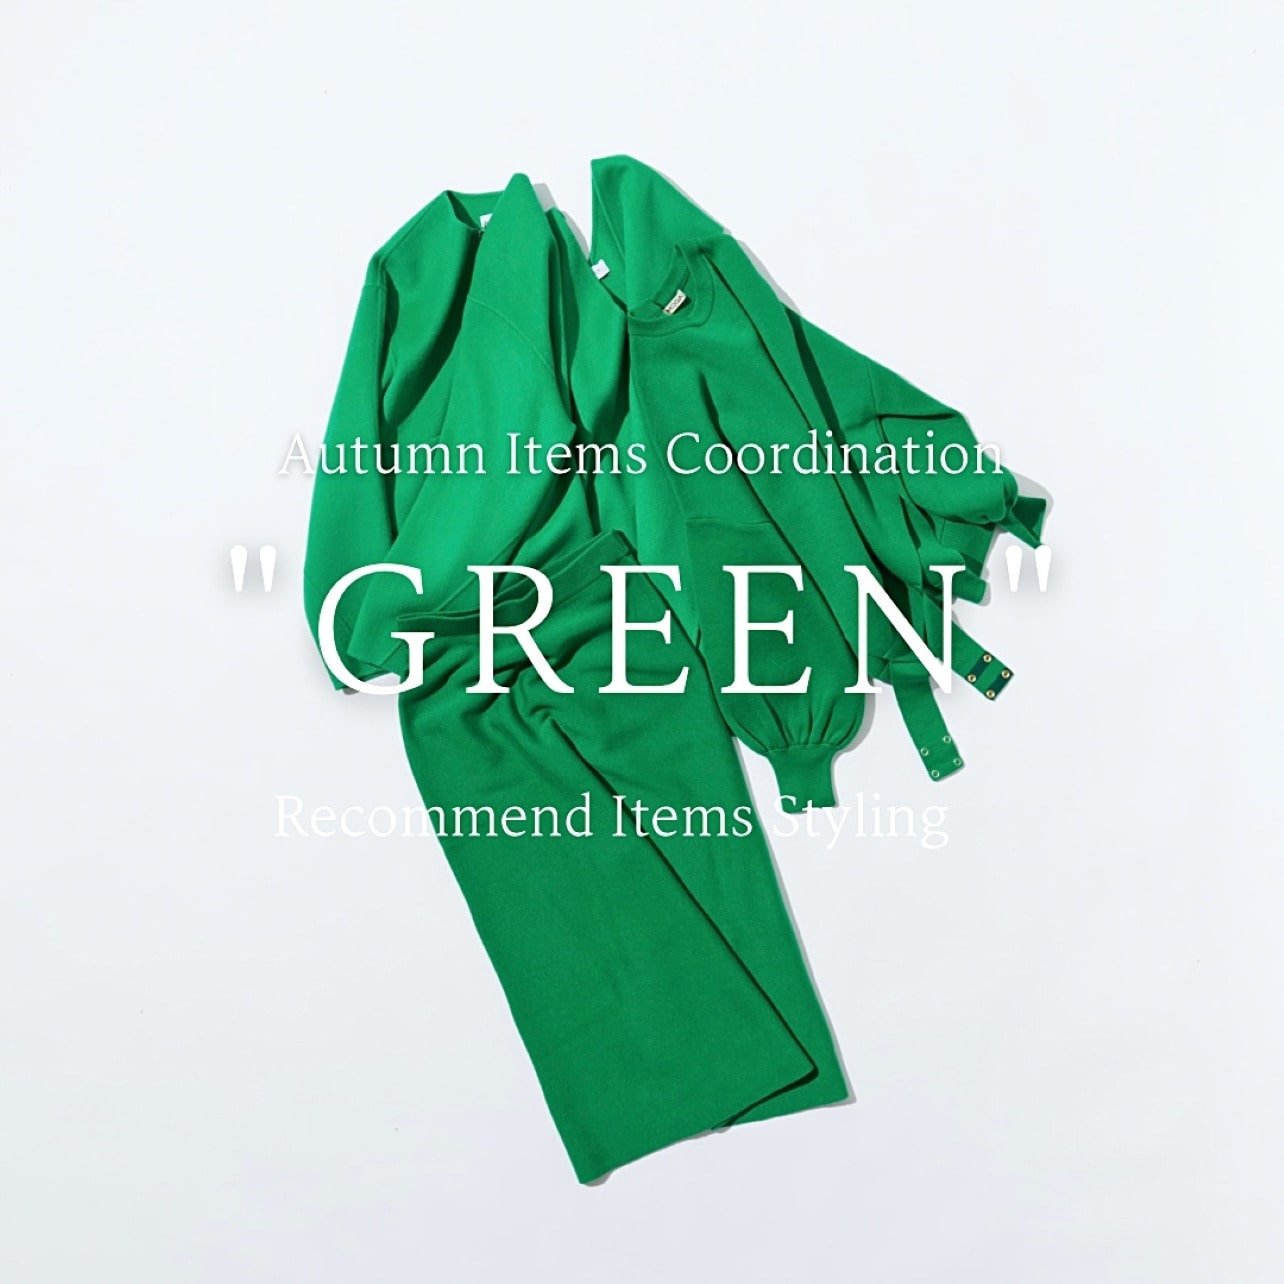 Recommend Items Styling "GREEN"